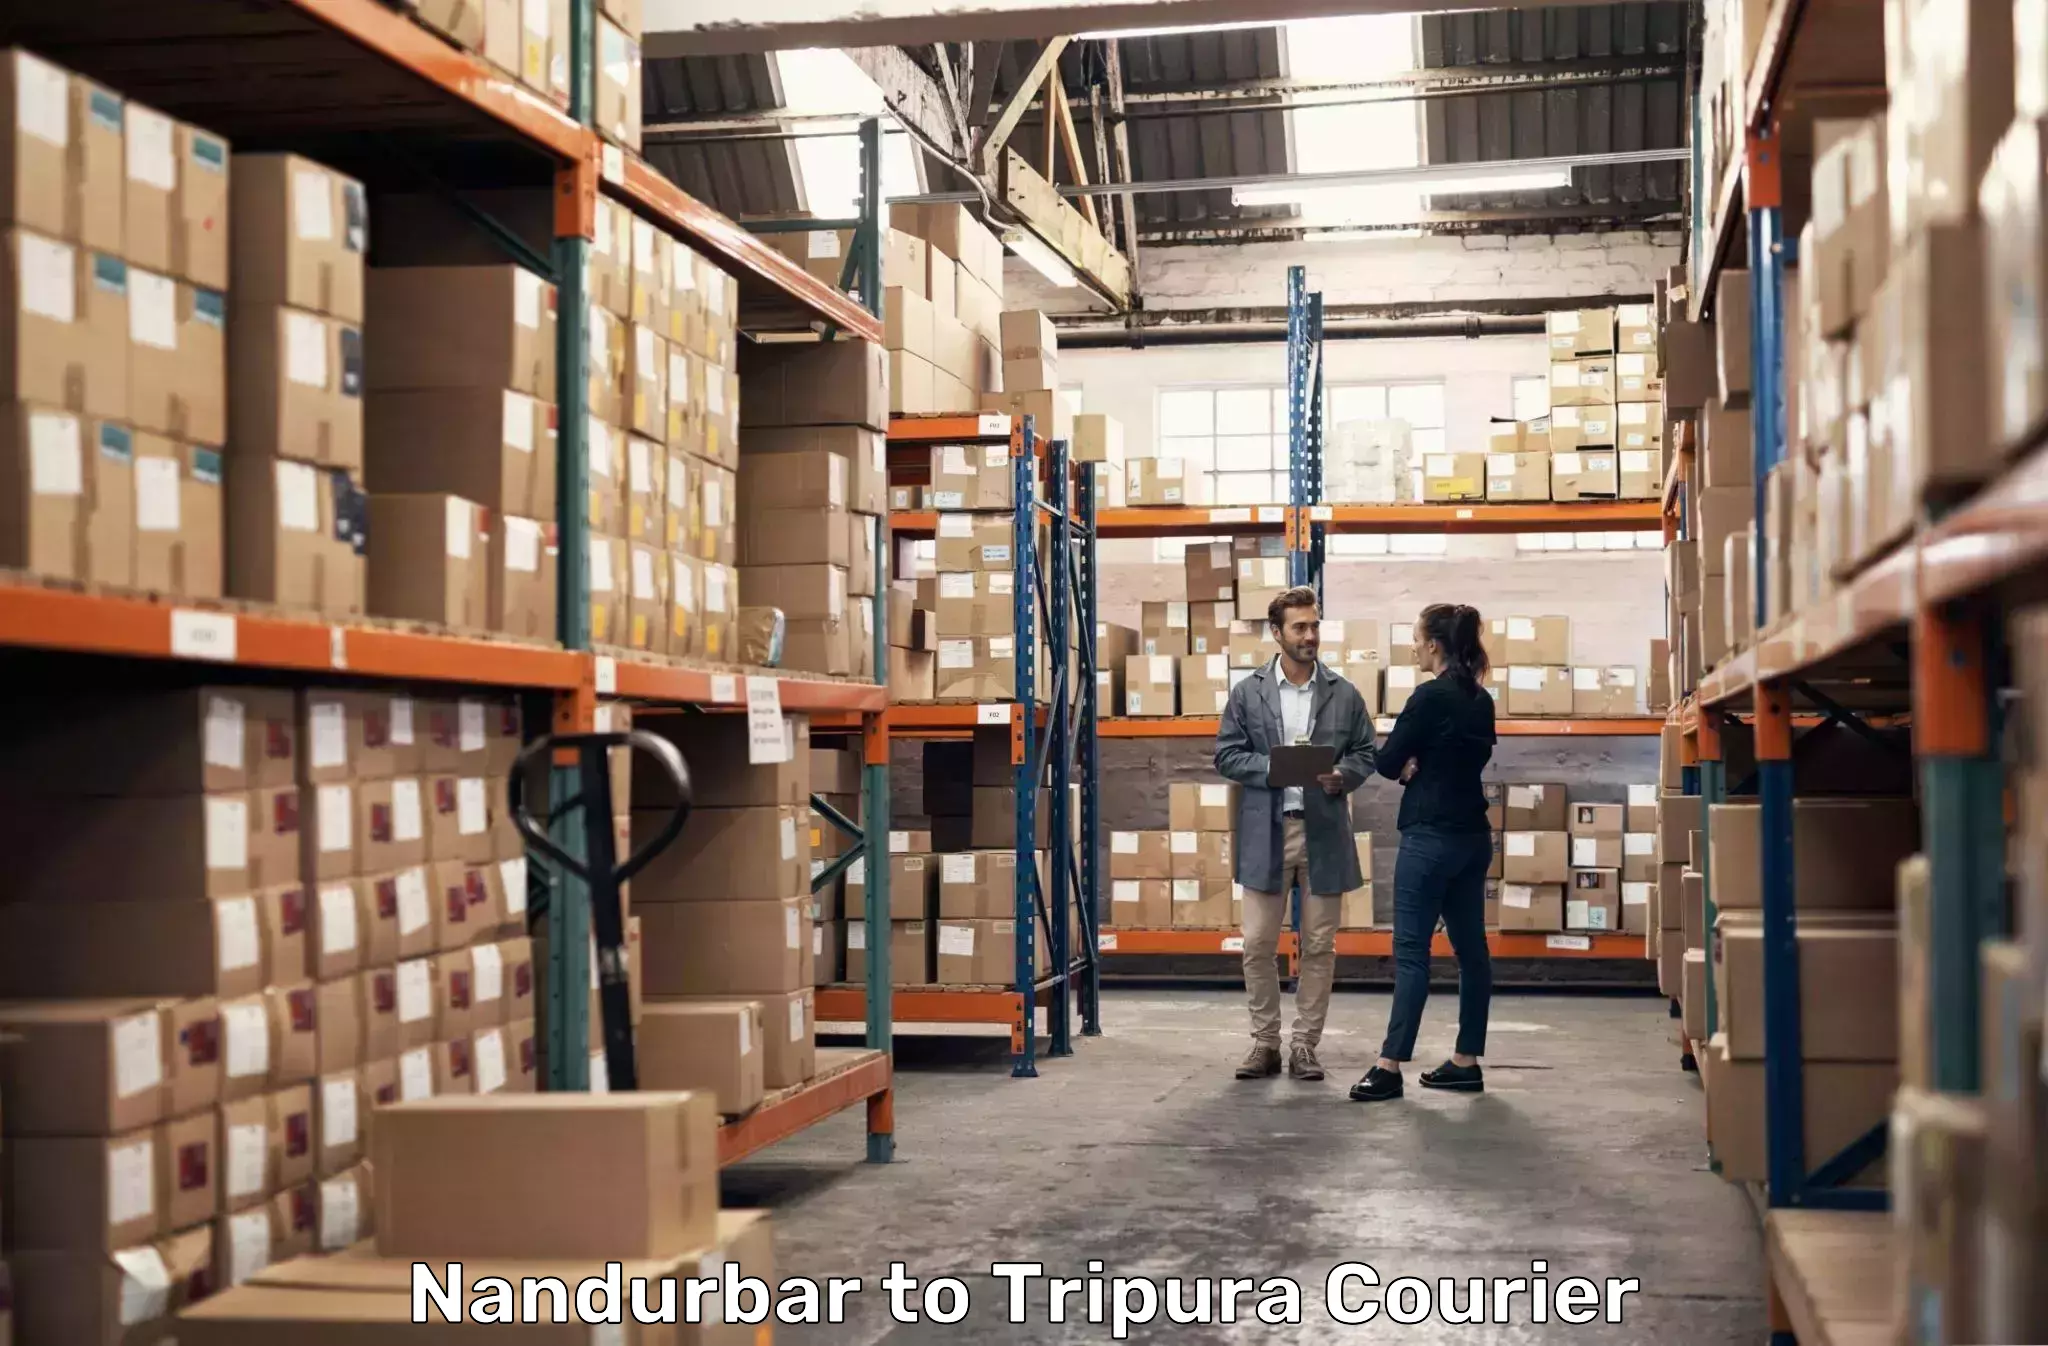 Express package delivery Nandurbar to Udaipur Tripura